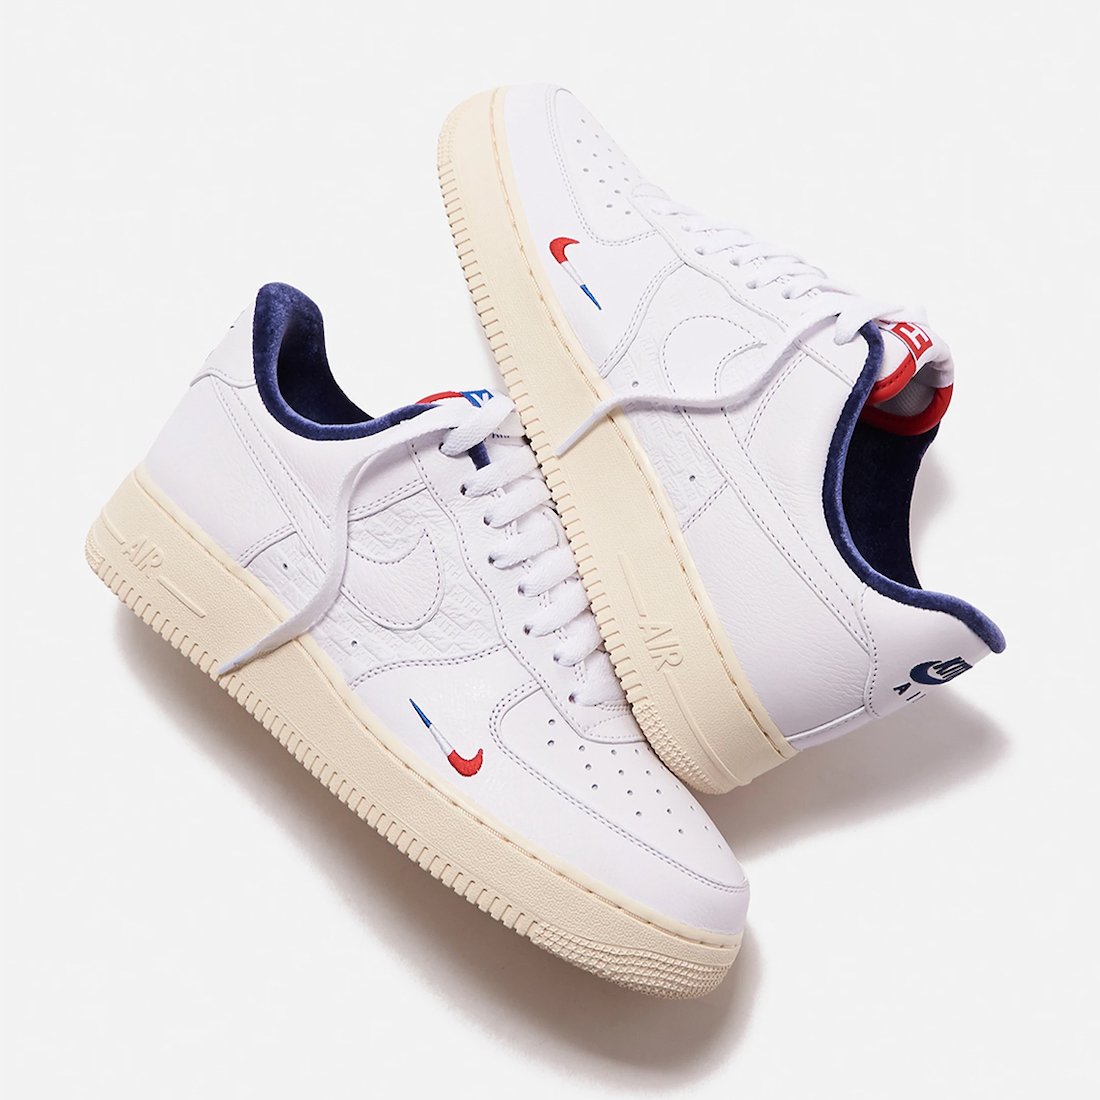 Kith Nike Air Force 1 Paris CZ7927-100 Release Date